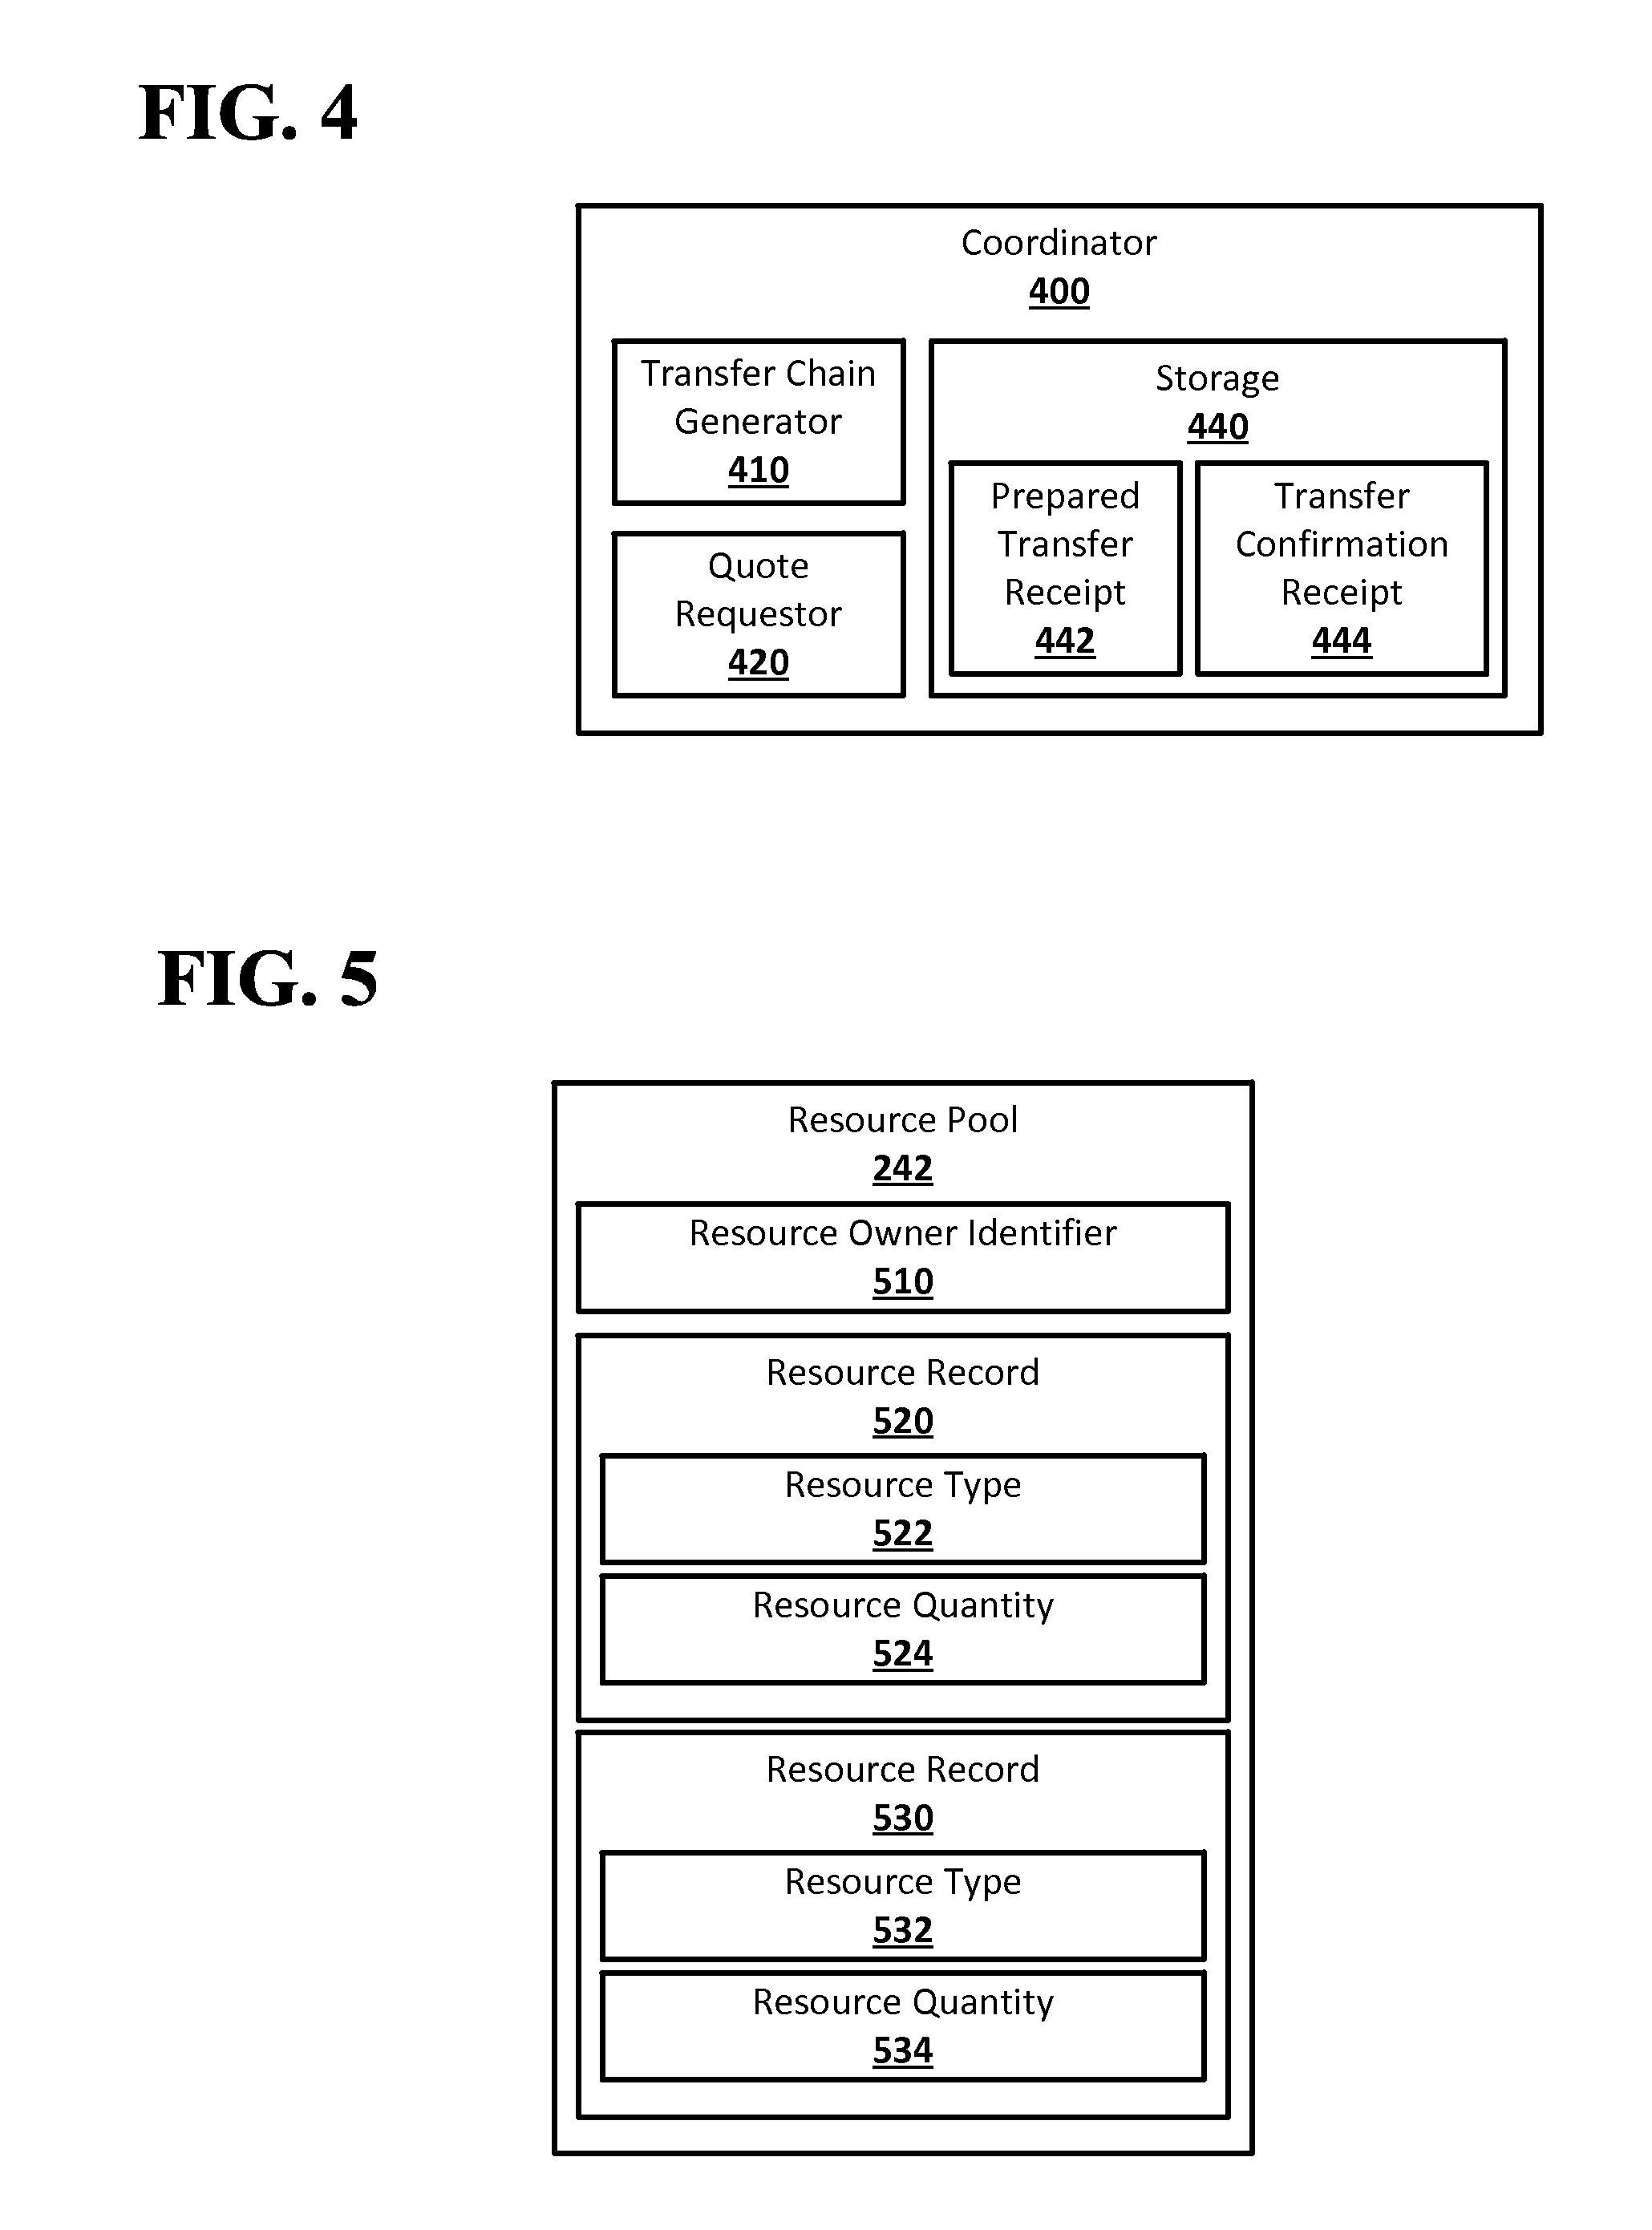 Temporary consensus networks in a resource transfer system